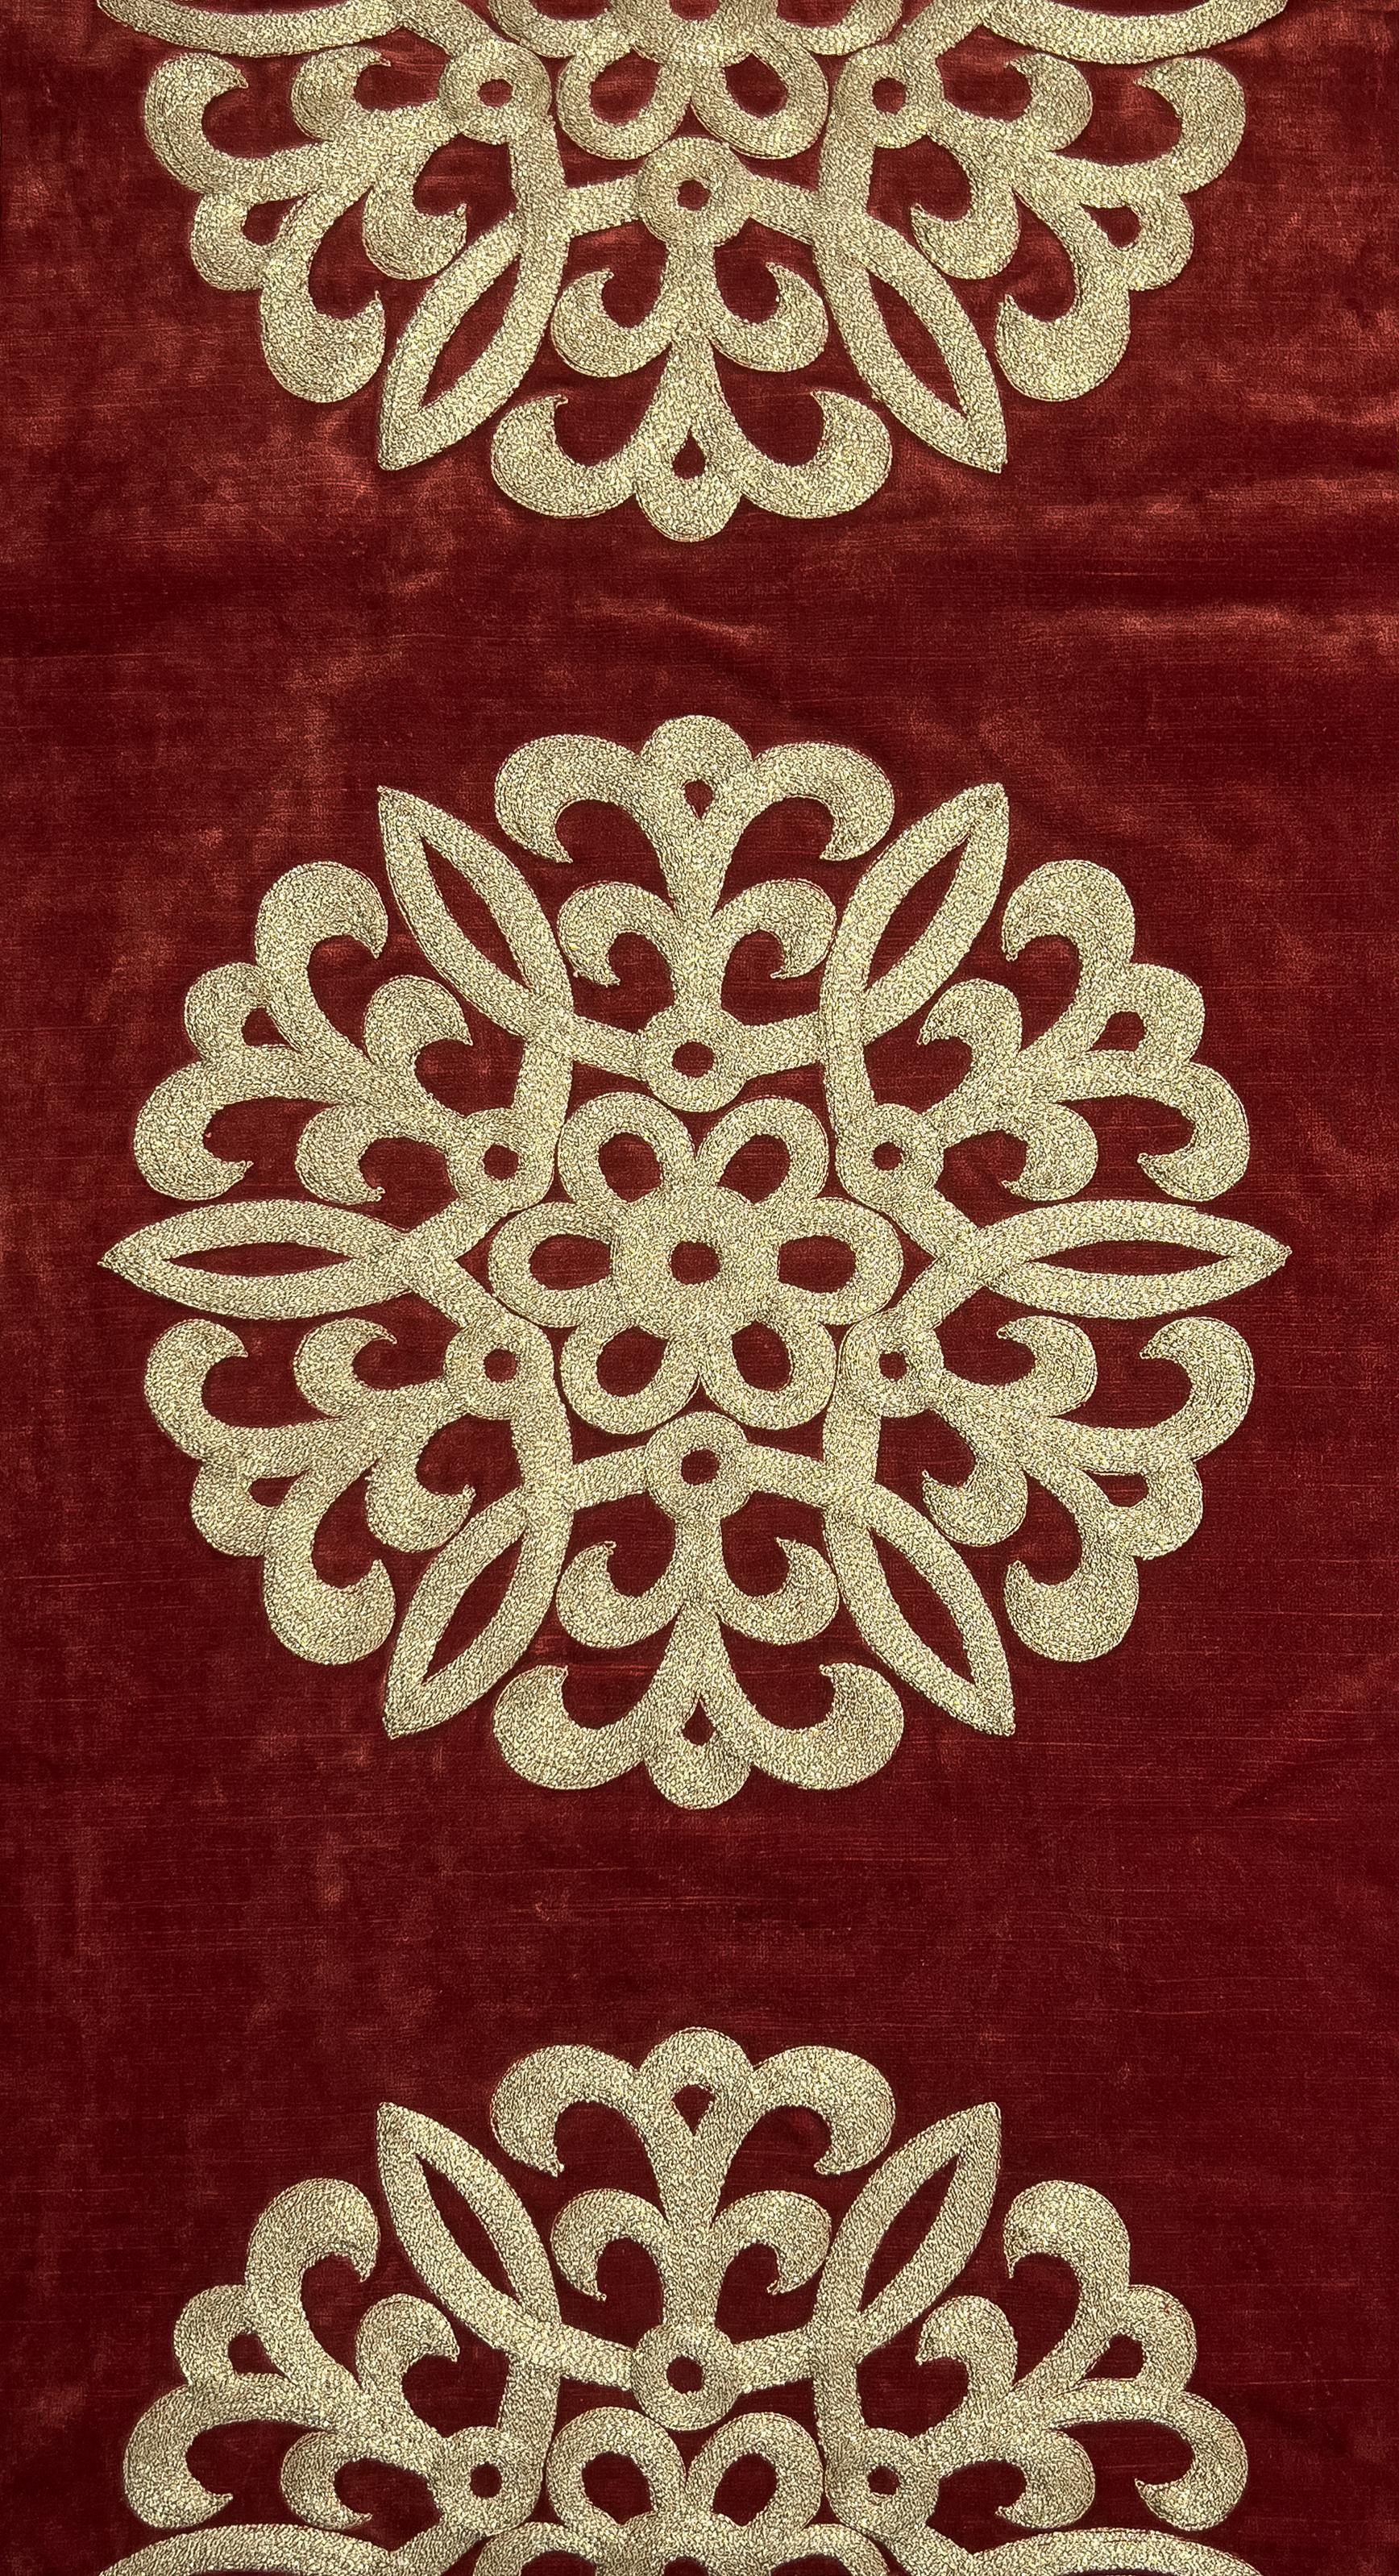 Brocade: Bootas (Motifs) - Embroidered Tapestry Wall Hanging  - Other Art Style Art by Shabbir Merchant